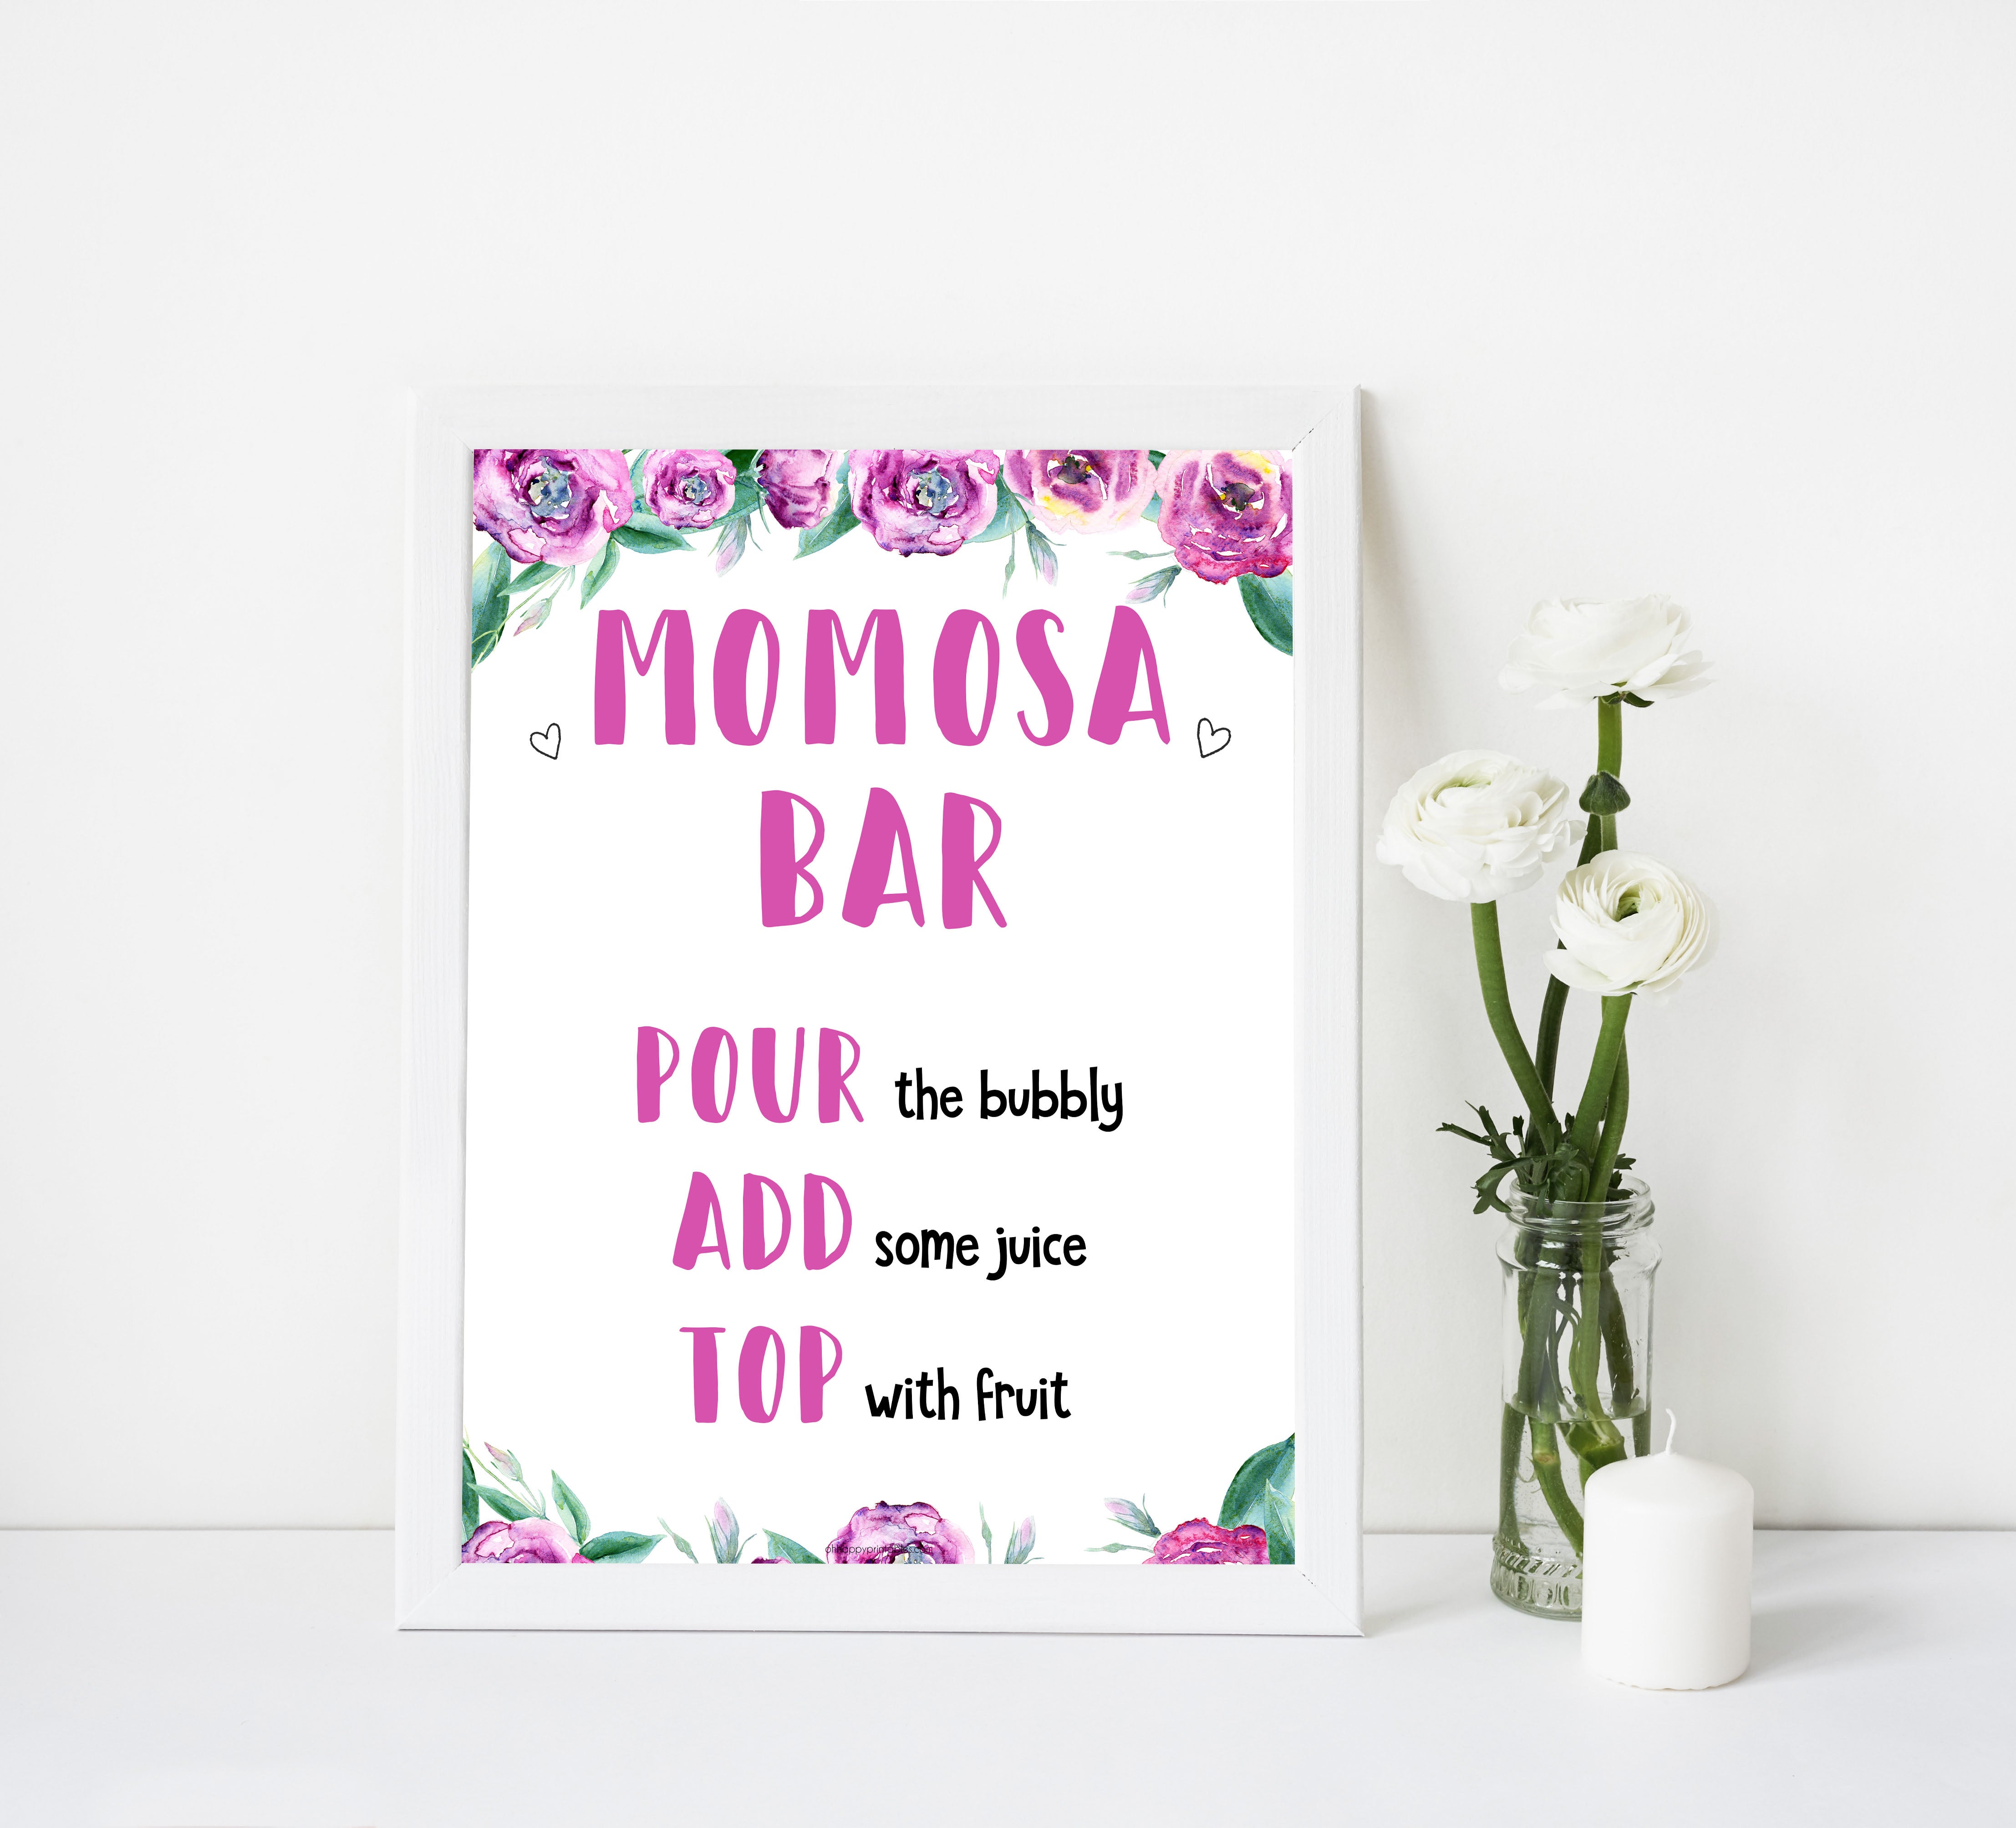 8 baby shower signs pack, printable baby shower signs decor, purple peonies baby shower sign pack, fun baby shower ideas